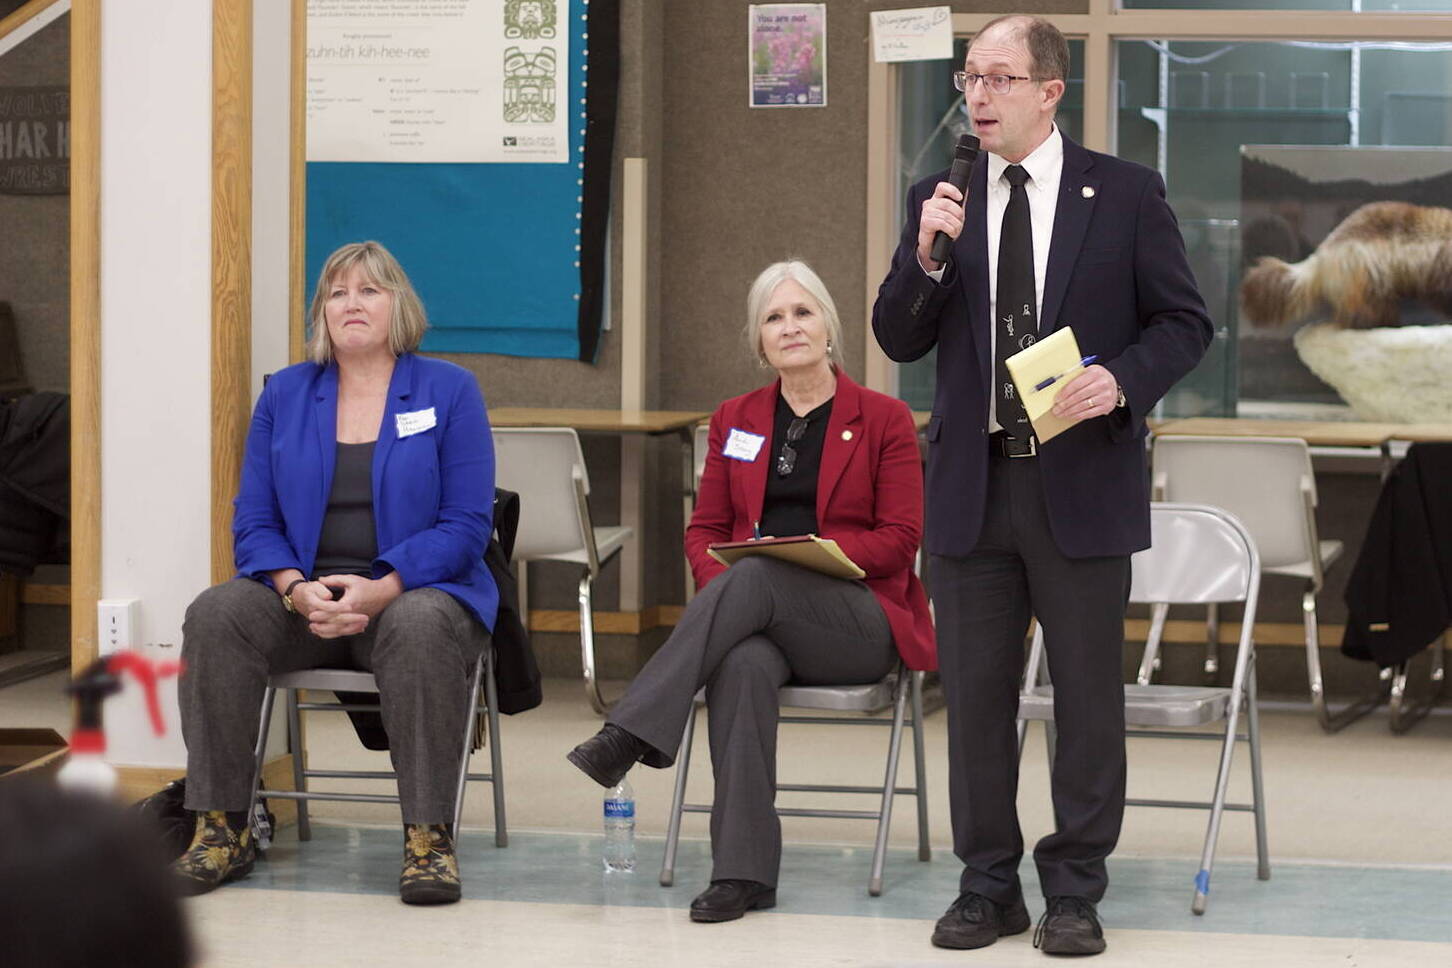 Mark Sabbatini / Juneau Empire file 
Juneau state Sen. Jesse Kiehl, standing, addresses a town hall audience Jan. 11 at Dzantik’i Heeni Middle School as Juneau state Reps. Sarah Hannan, far left, and Andi Story wait their turn to discuss their priorities during the current legislative session.